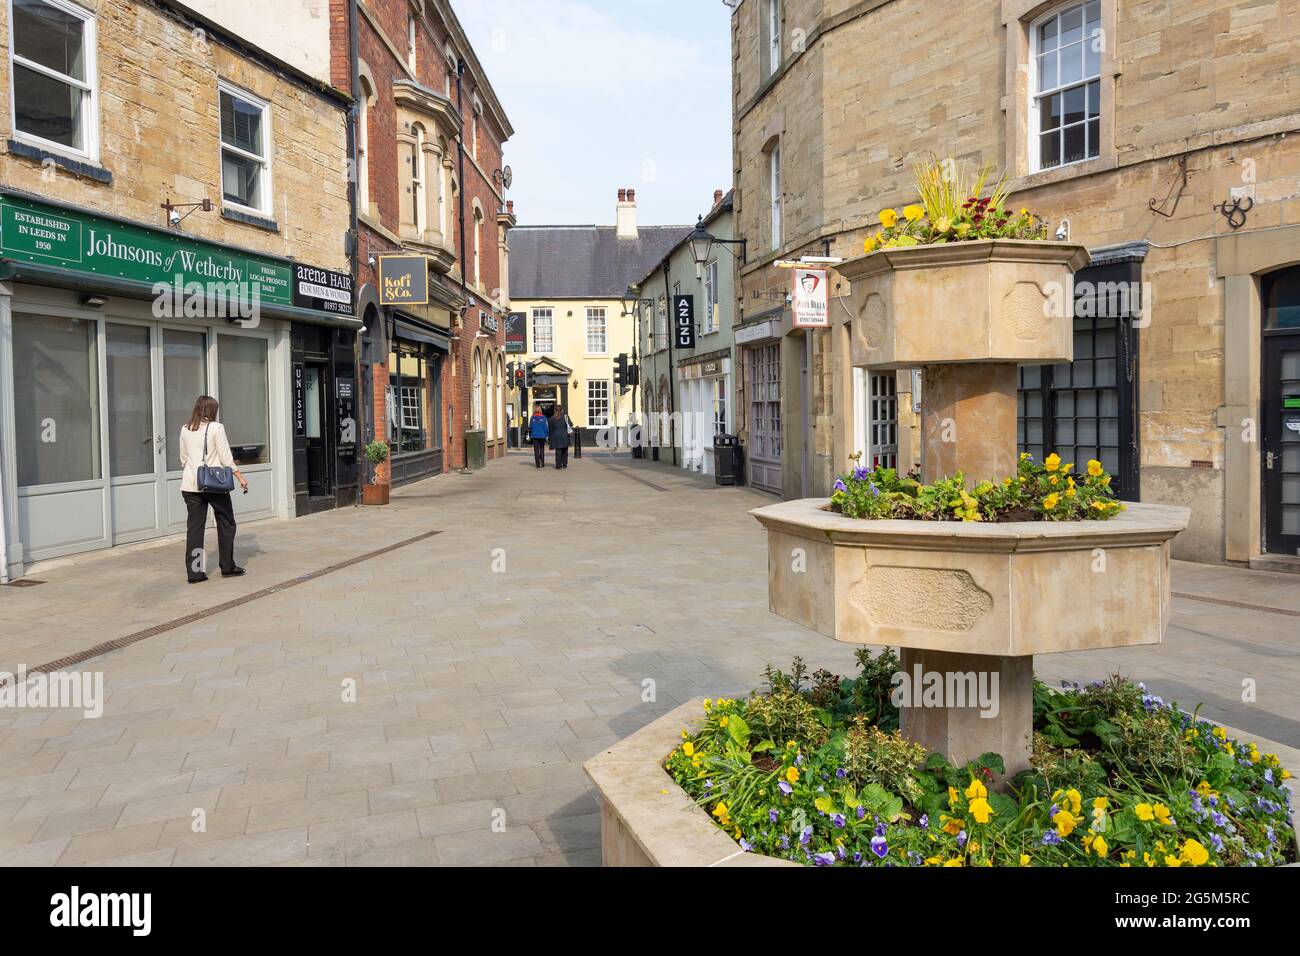 High Street da Market Place, Wetherby, West Yorkshire, Inghilterra, Regno Unito Foto Stock